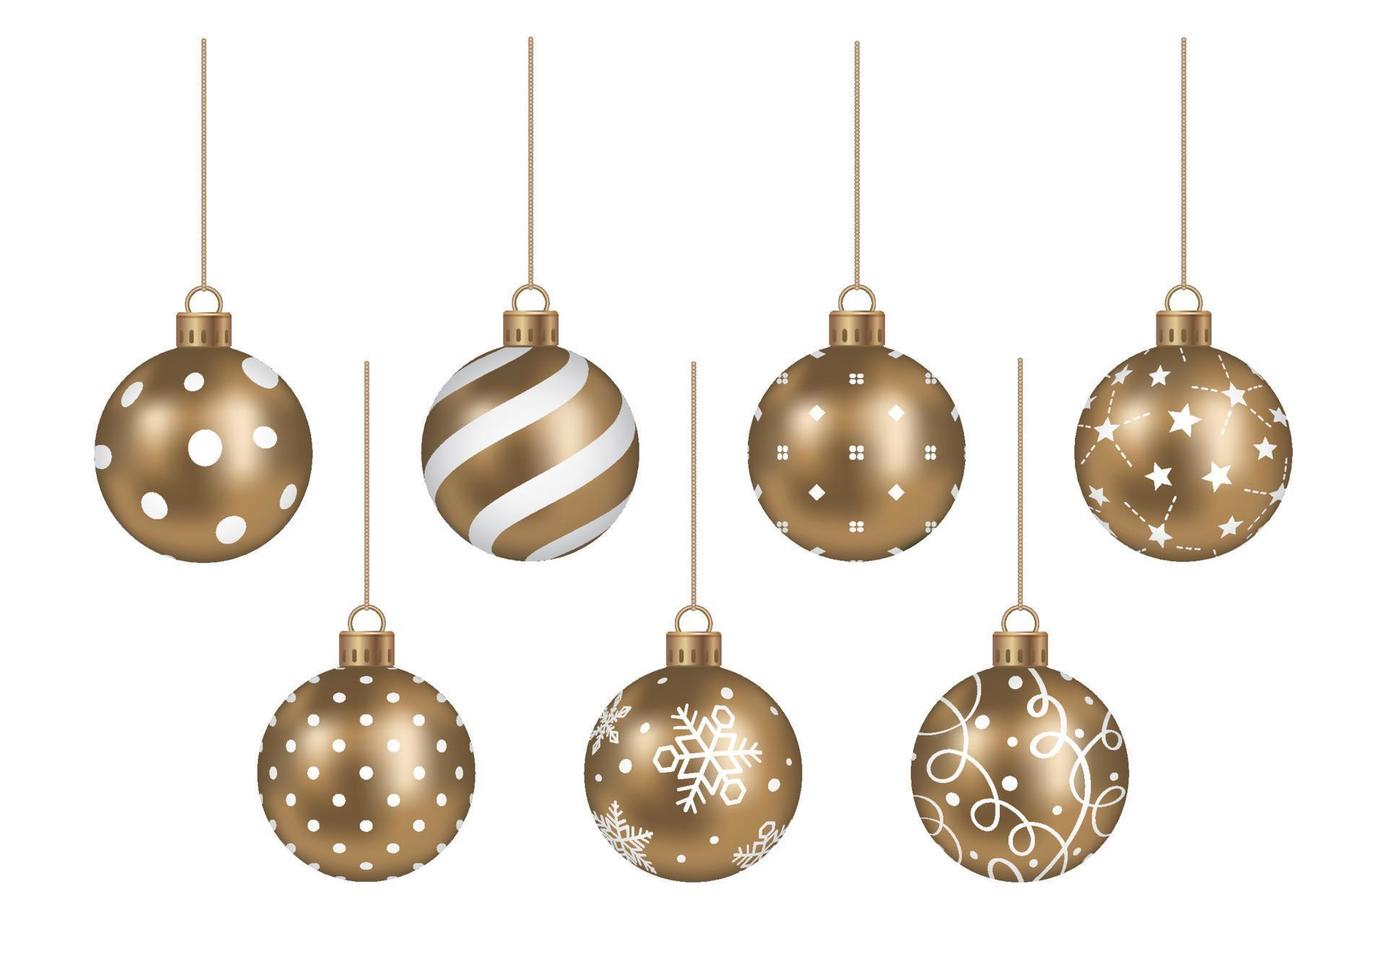 Realistic Gold Christmas Ball Vector Illustration Set Isolated On A White Background.